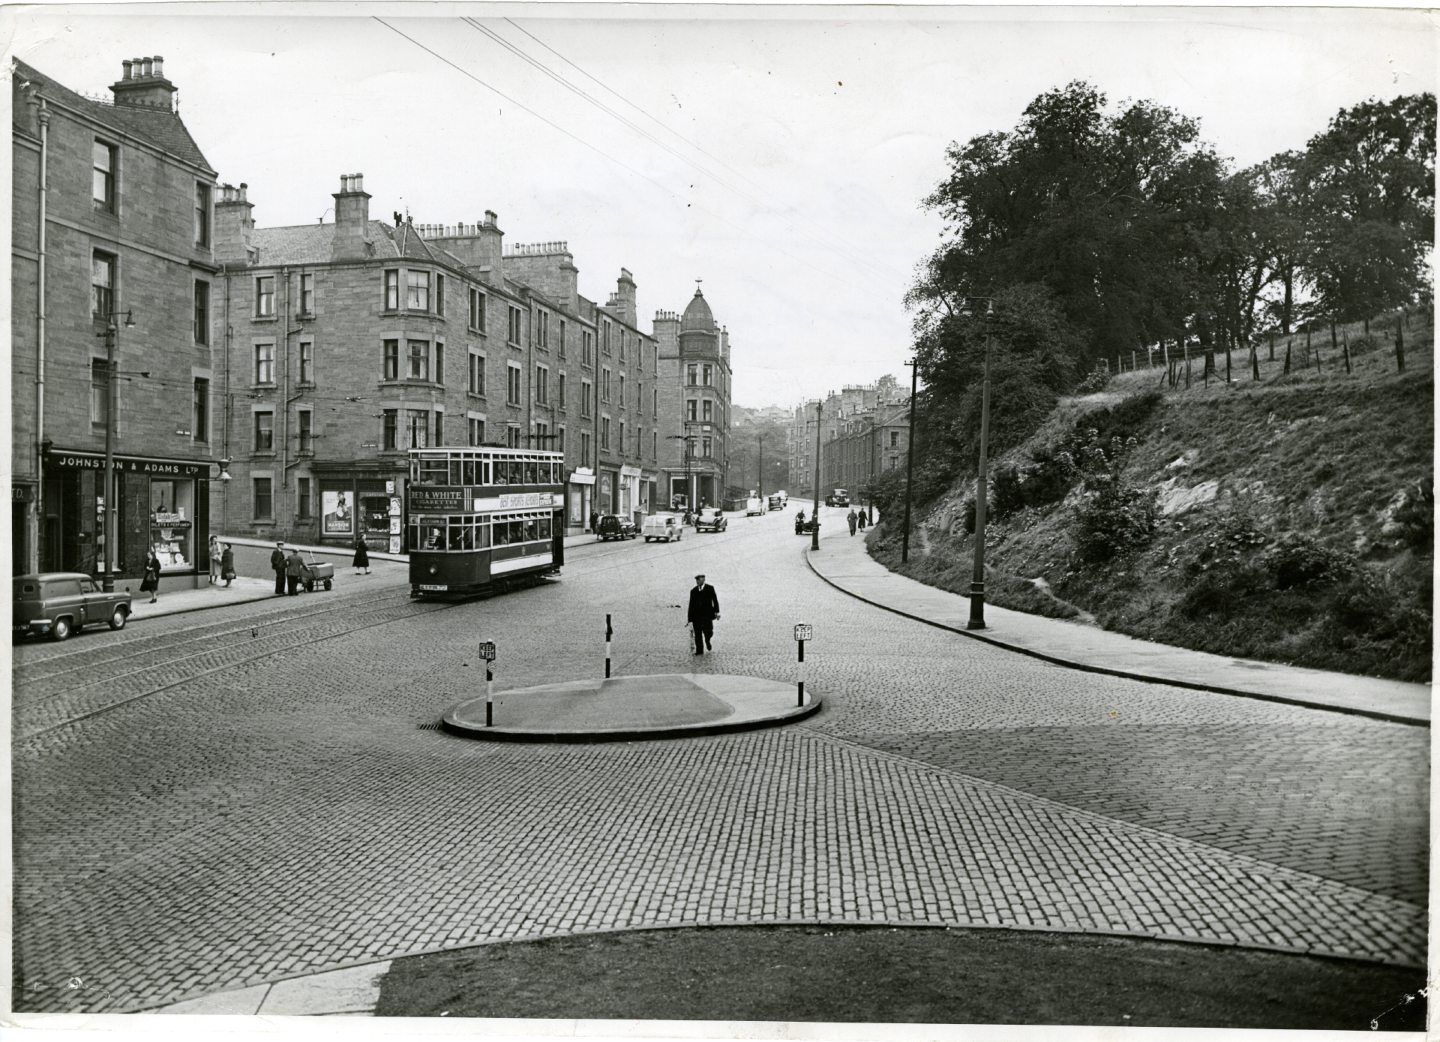 Photograph showing a view of Lochee Road with a tram in view in September 1956.